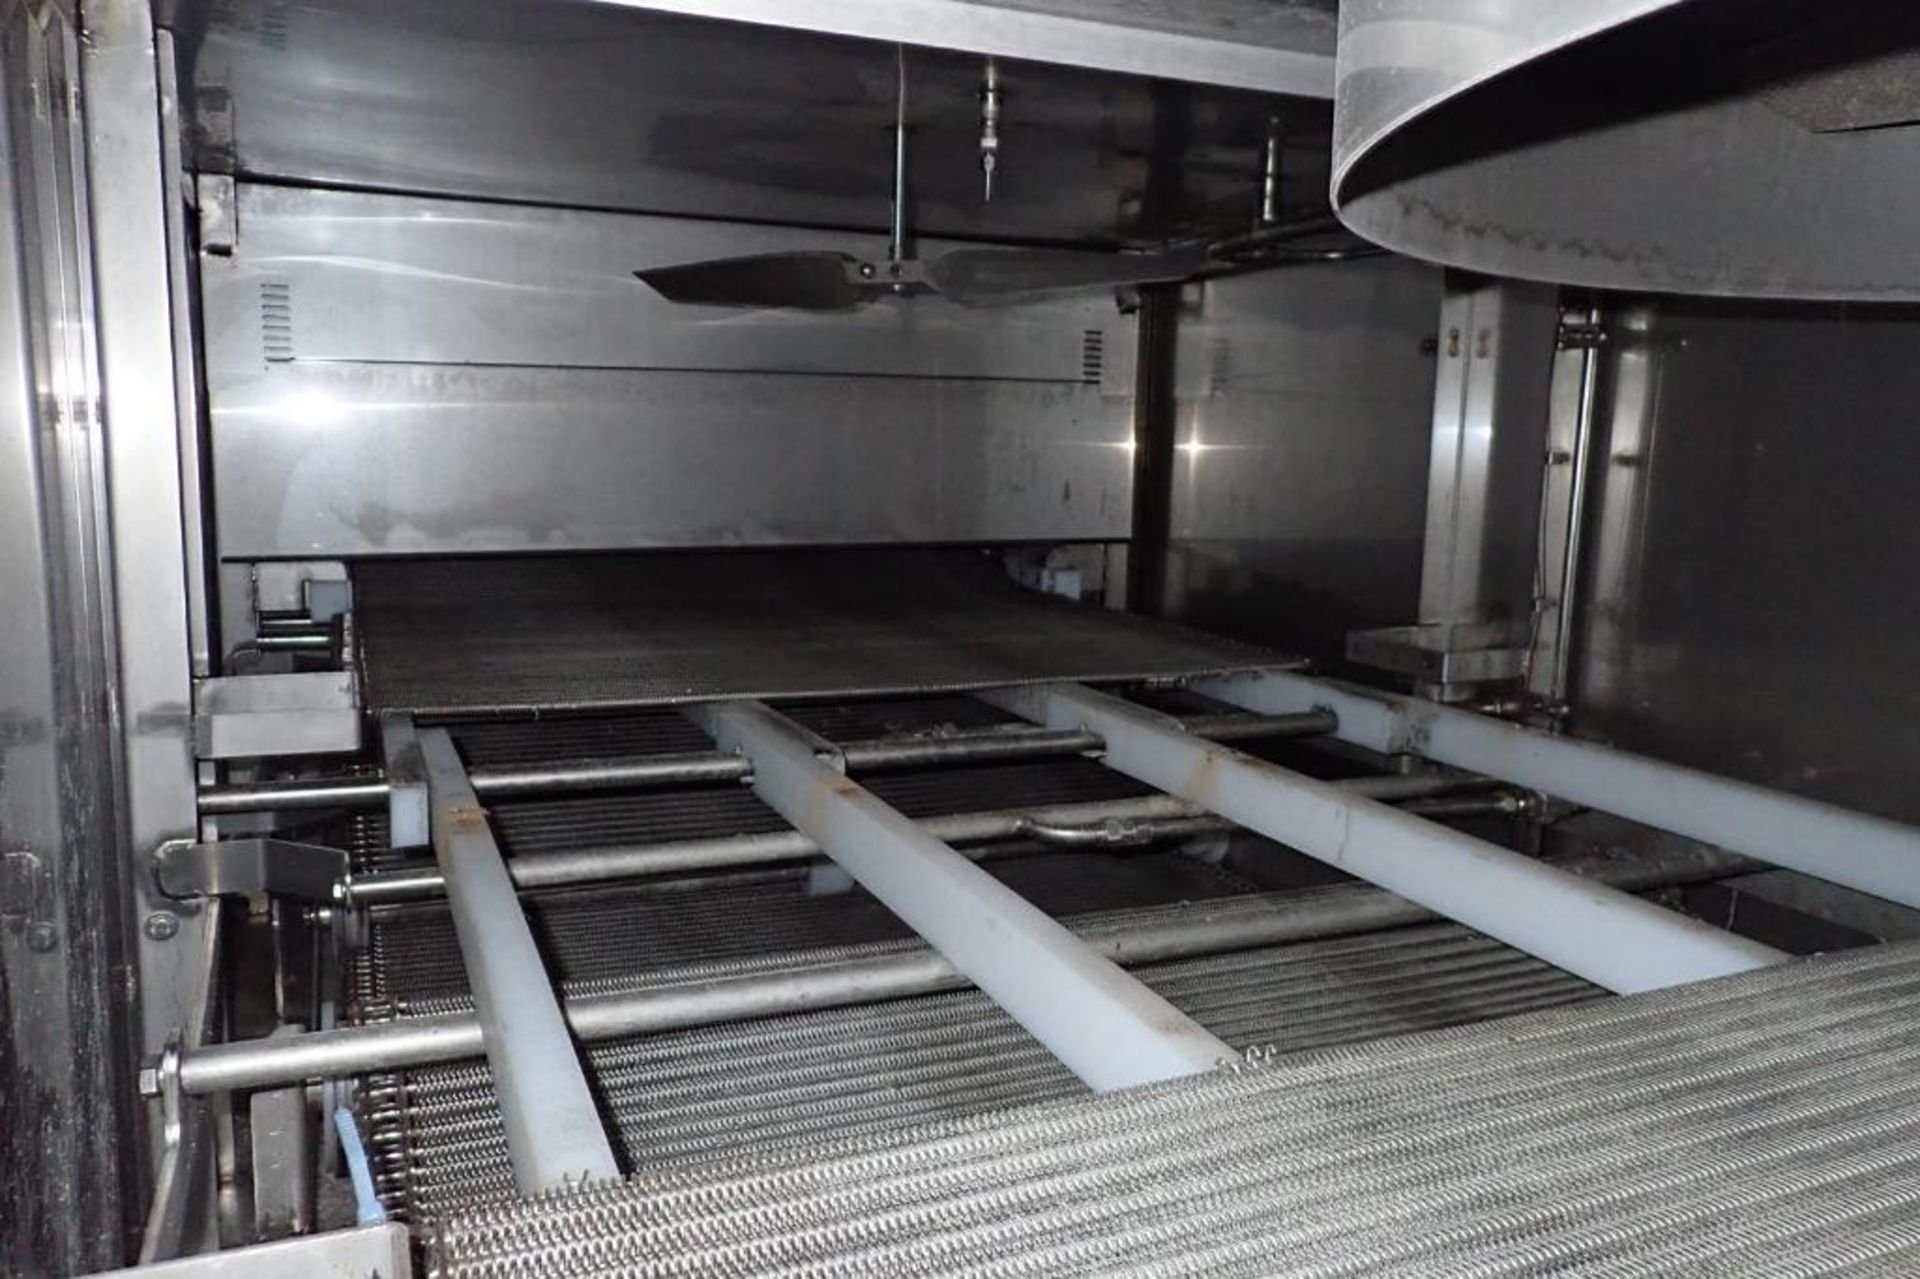 2013 Praxair nitrogen cooling tunnel {Located in Indianapolis, IN} - Image 11 of 23